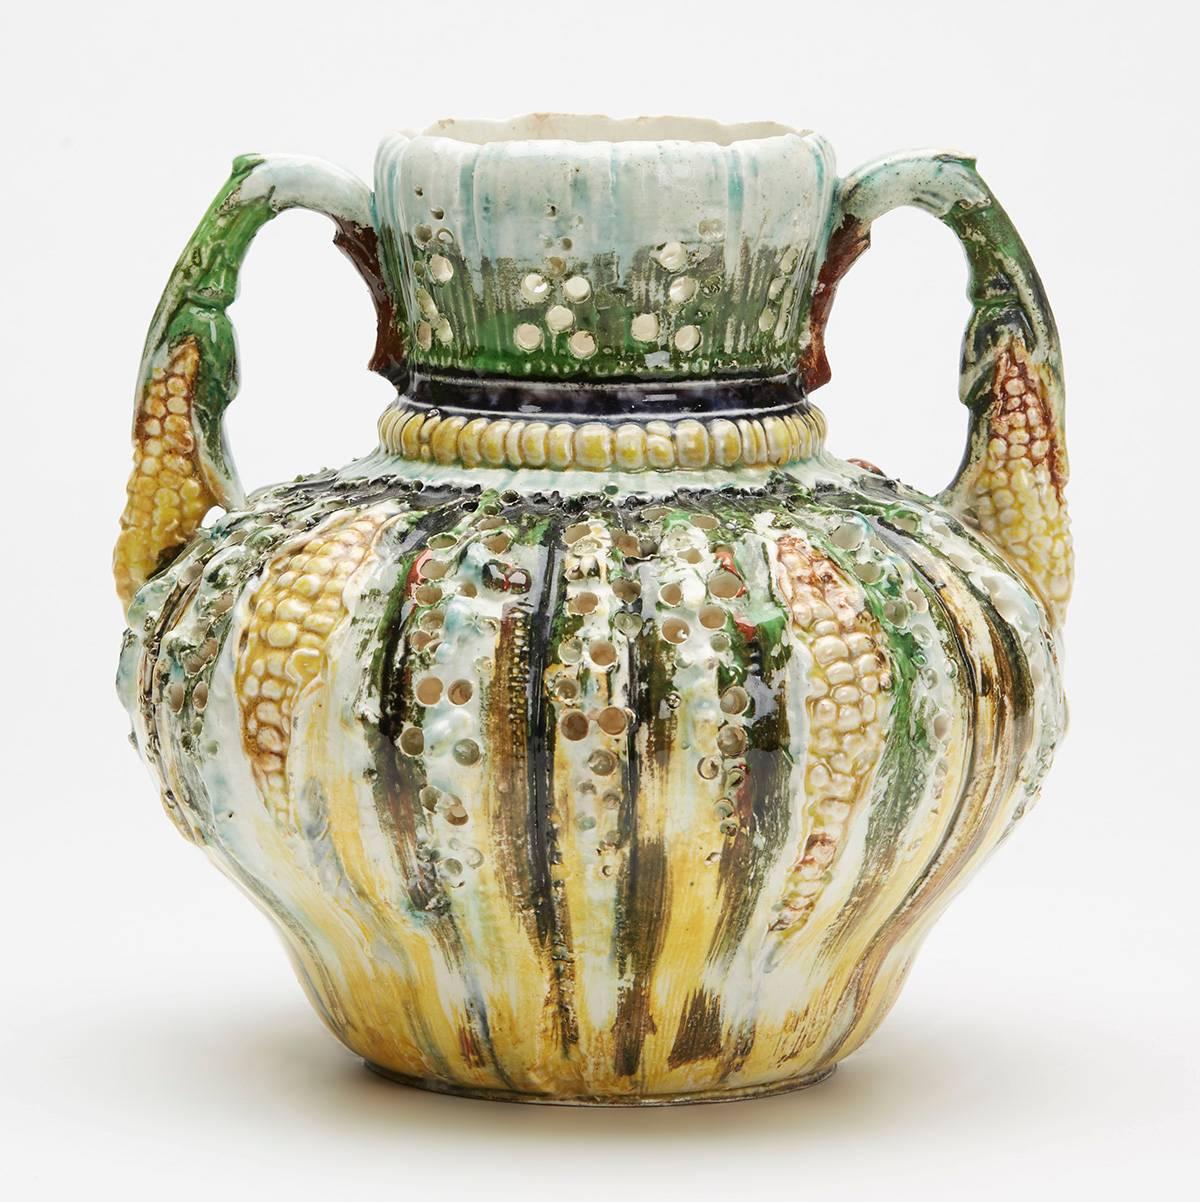 An unusual antique majolica glazed twin handled vase moulded with corn designs within a rough cast and pierced body. The lightly potted vase is of squat rounded shape with a rounded shaped neck corn and stem handles. The vase is painted in brightly